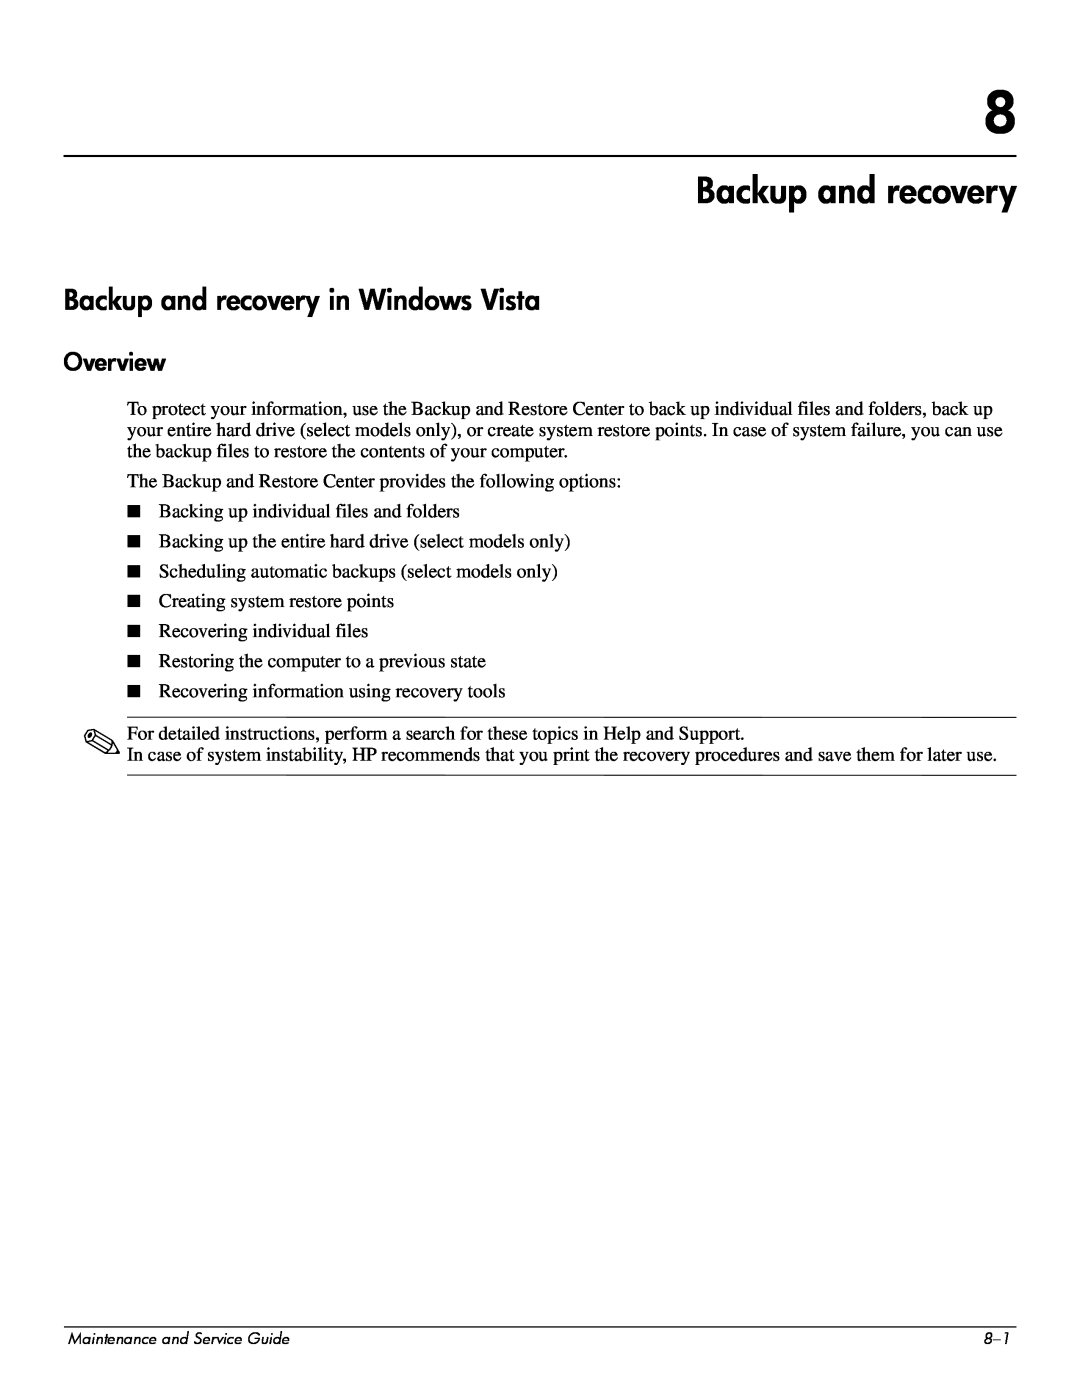 Compaq 515, 511, 510 manual Backup and recovery in Windows Vista, Overview 